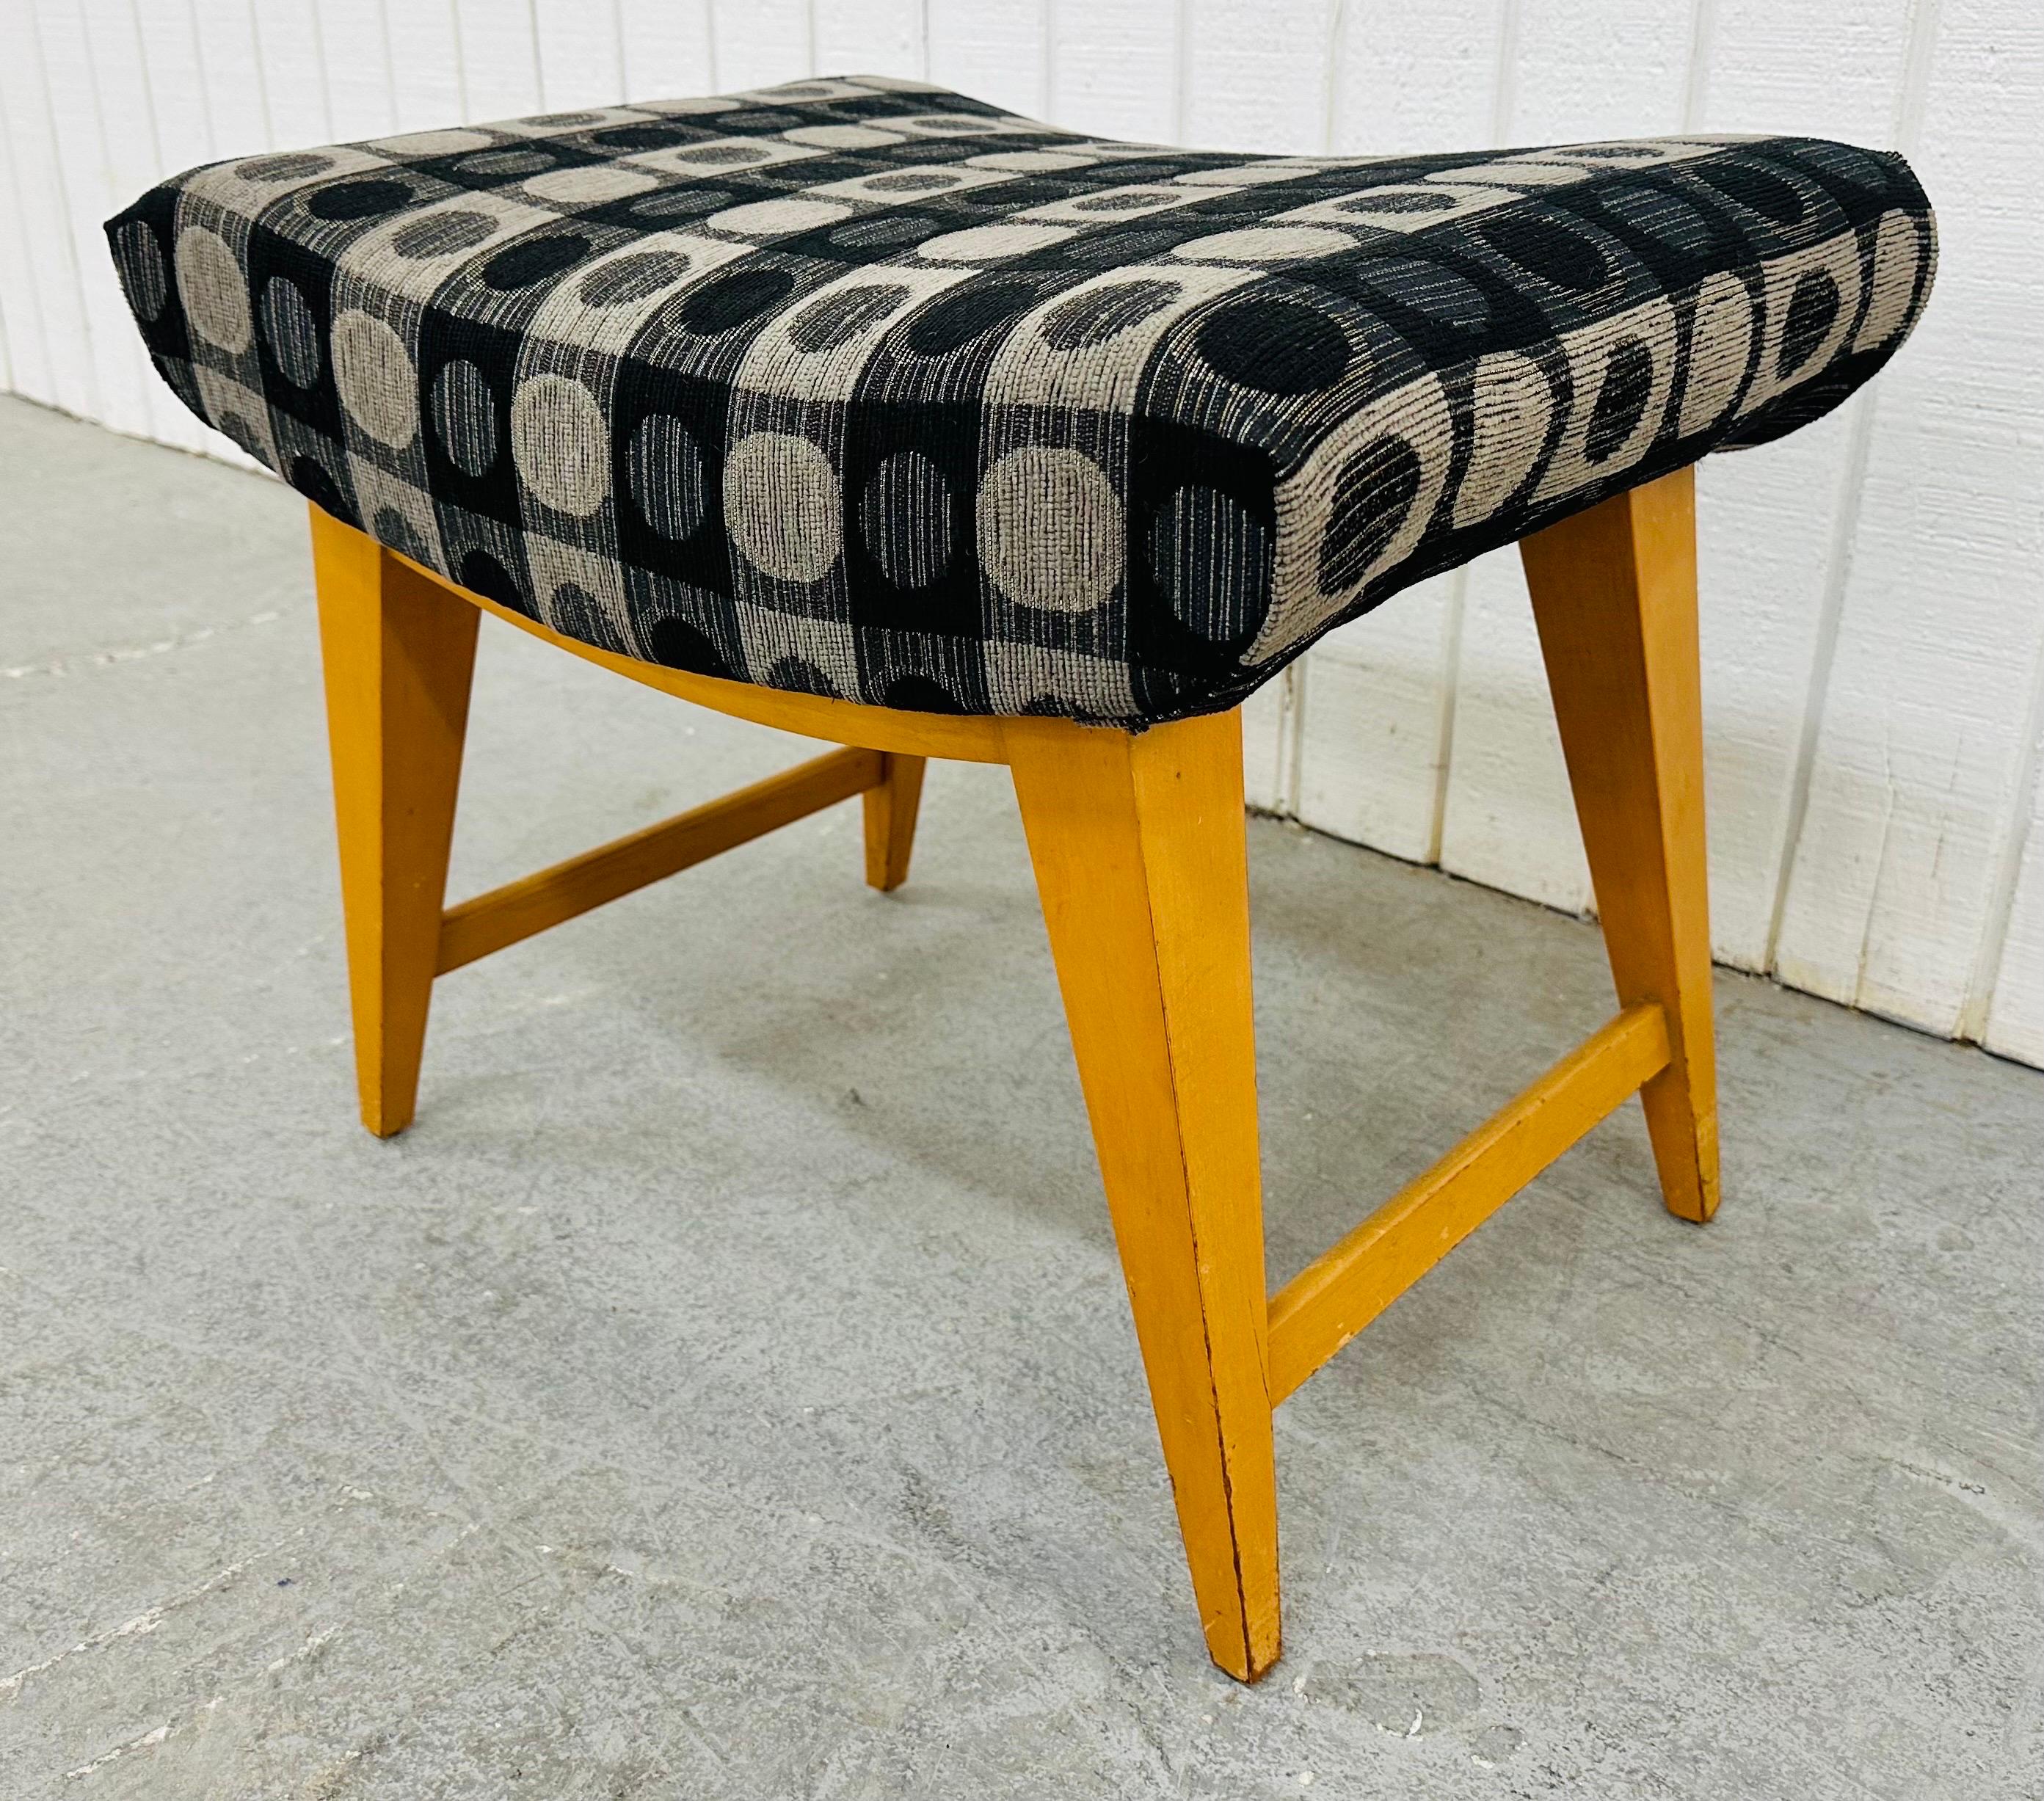 This listing is for a Mid-Century Modern Heywood Wakefield Ottoman. Featuring a curved rectangular top, champagne wood legs, and new upholstery! This is an exceptional combination of quality and design by Heywood Wakefield!